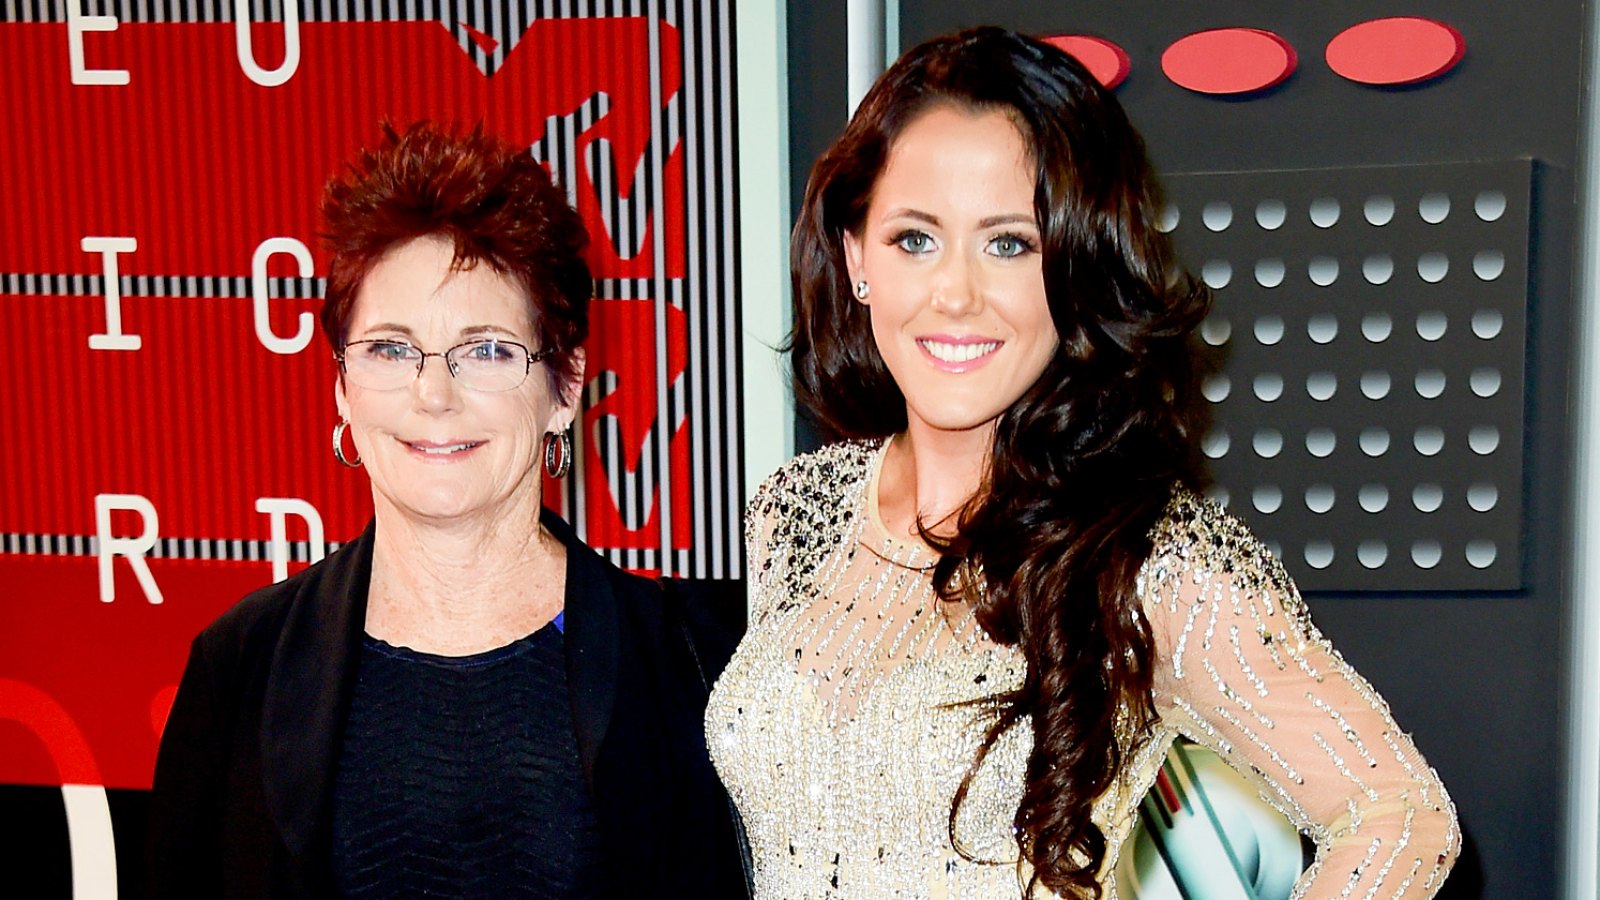 Barbara Evans and Jenelle Evans attend the 2015 MTV Video Music Awards at Microsoft Theater in Los Angeles, California.